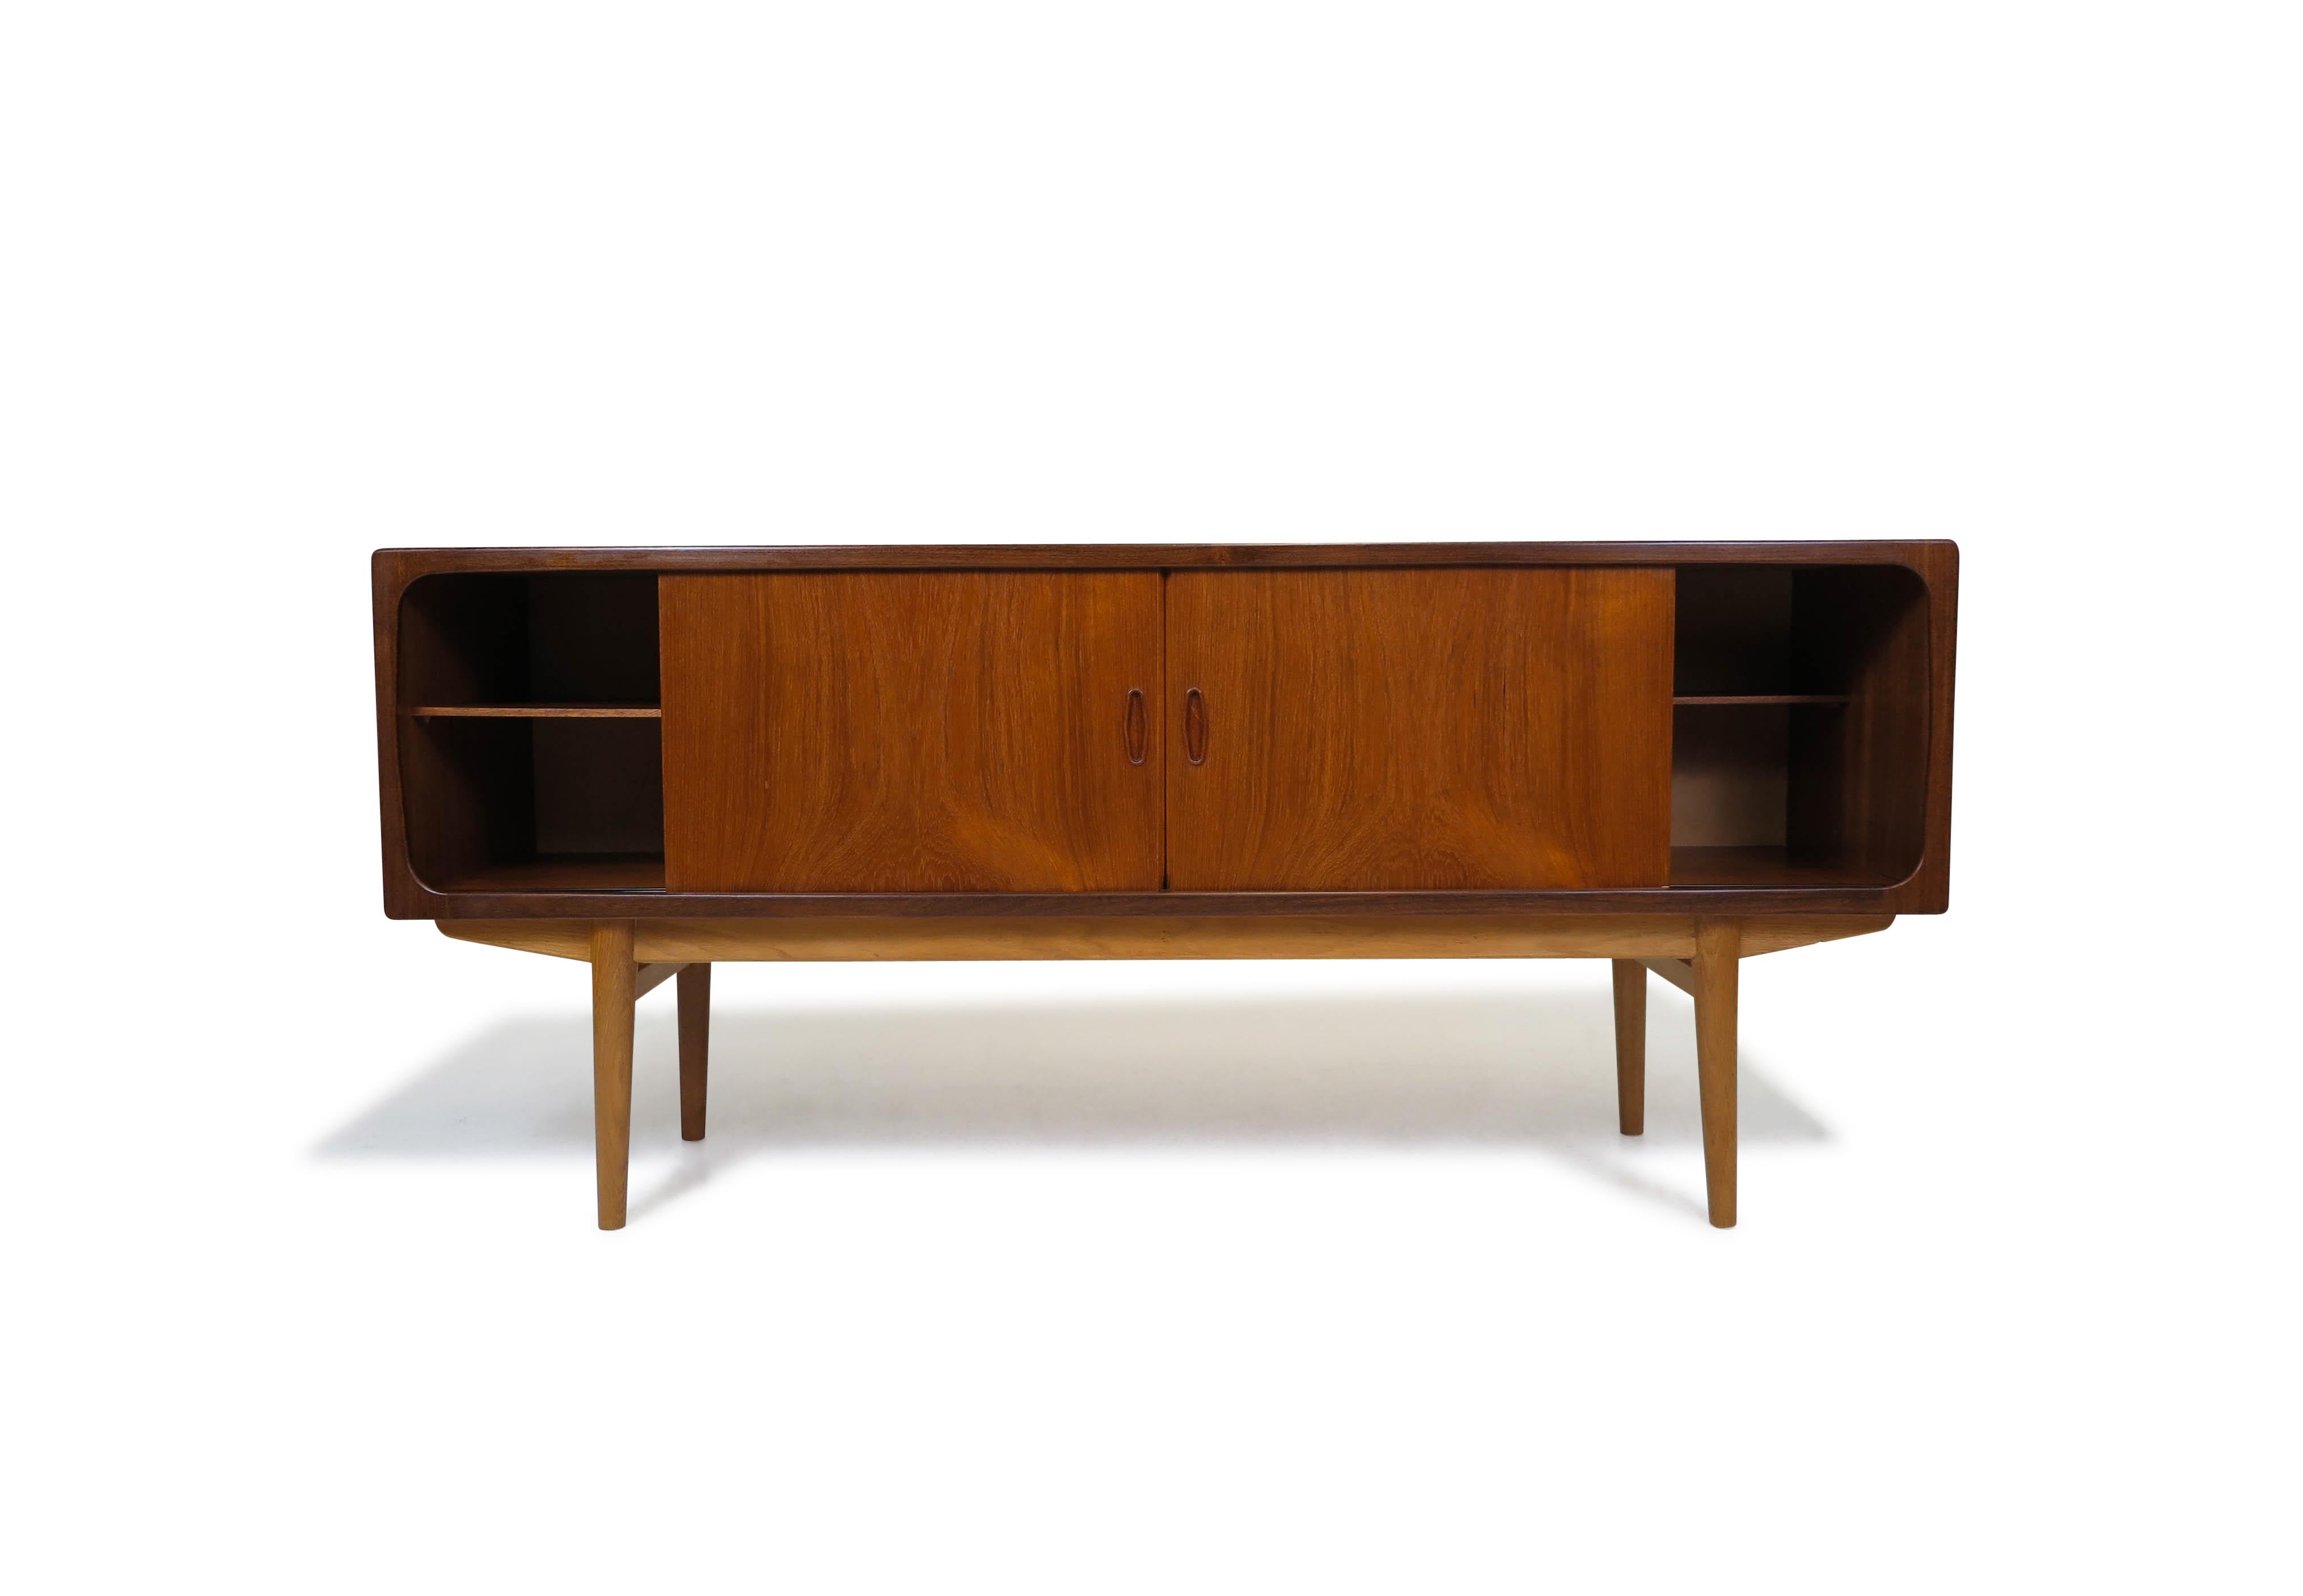 Mid-century teak credenza attributed to Johansen Andersen for Clausen Sons, Denmark, 1960s. This handcrafted sideboard is made from book-matched old-growth teak and features four sliding cabinet doors with carved recessed pulls. Opening the doors